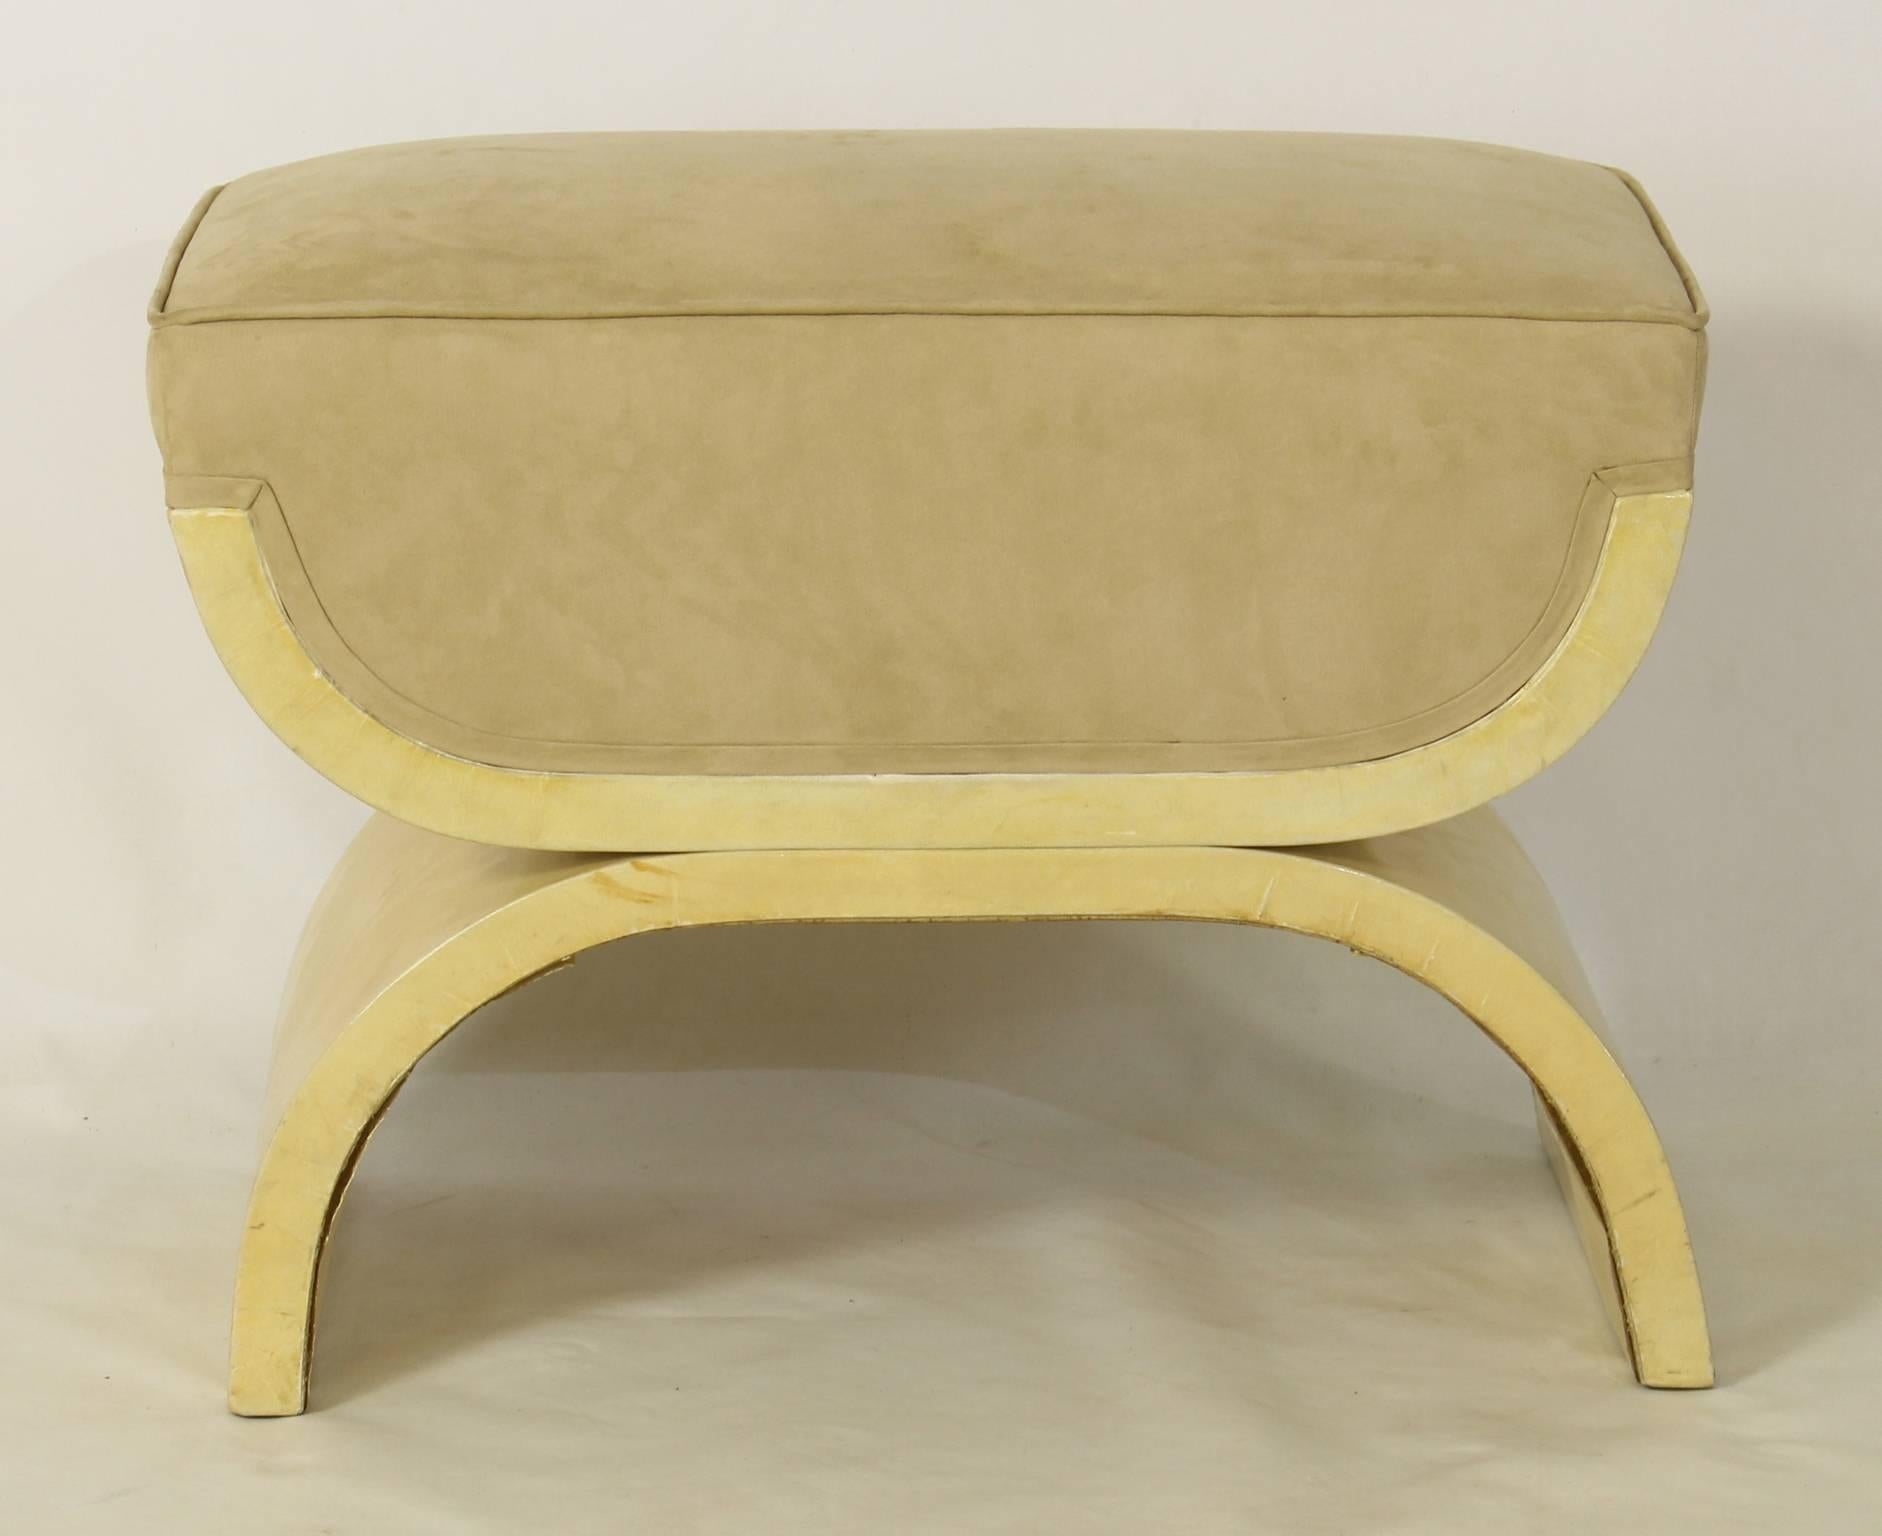 A sleek and elegant Art Deco inspired ottoman or stool covered in a cream colored lacquered goatskin with beige suede seat.